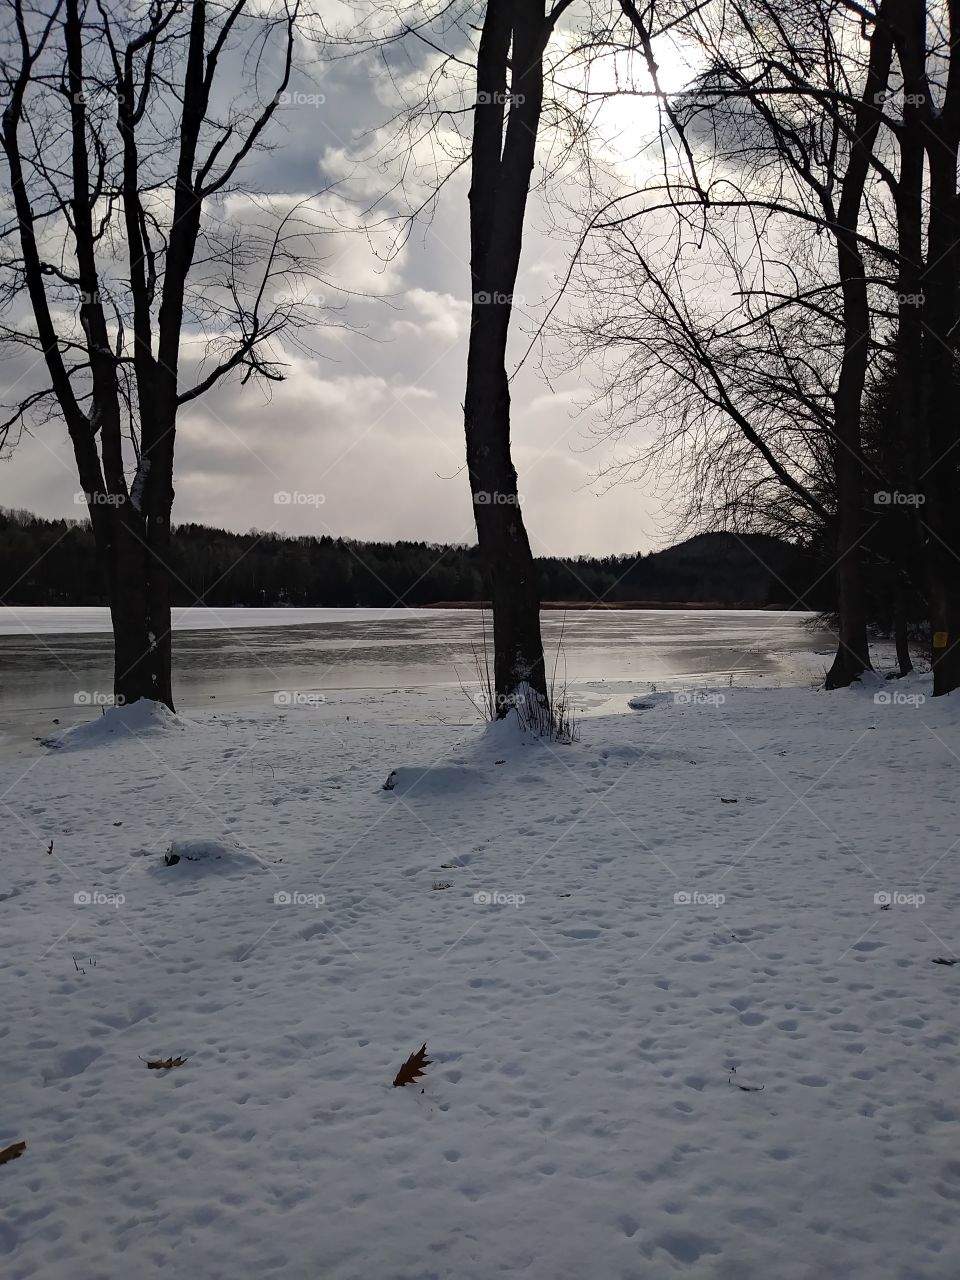 a trip to the lake, nearly frozen.. yet still so beautiful